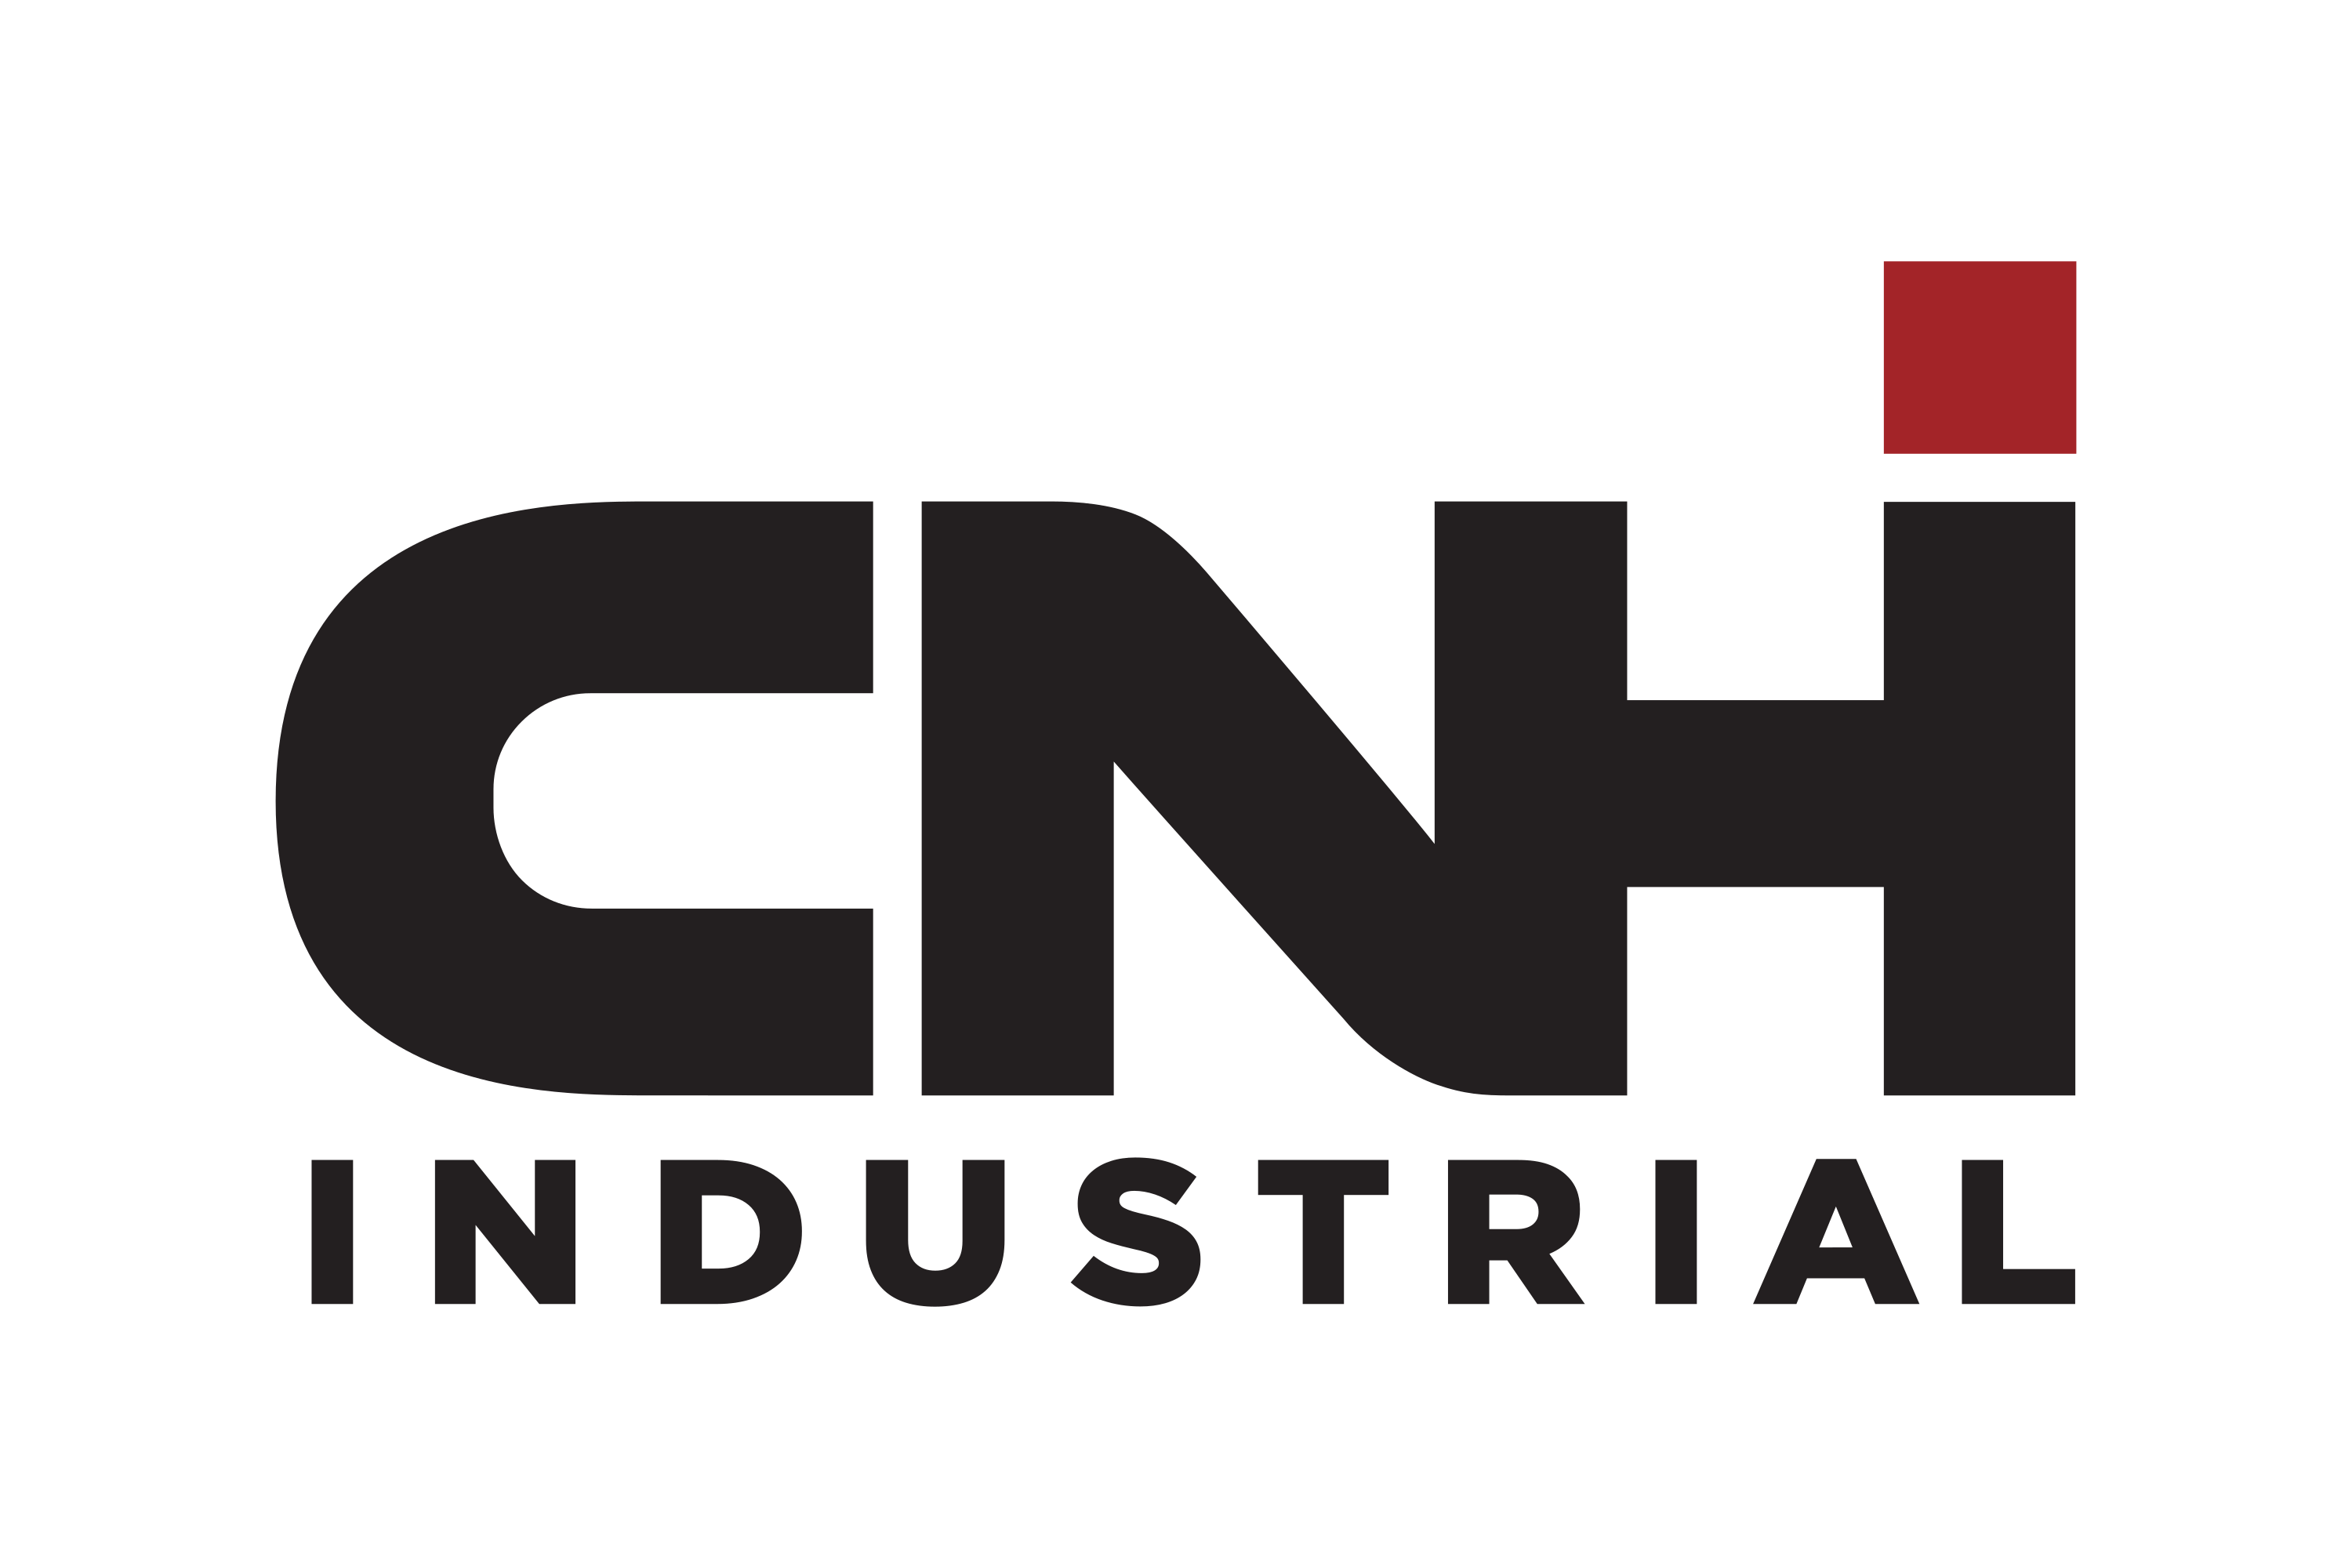 Download CNH Industrial Logo in SVG Vector or PNG File ...
 Industrial Company Logo